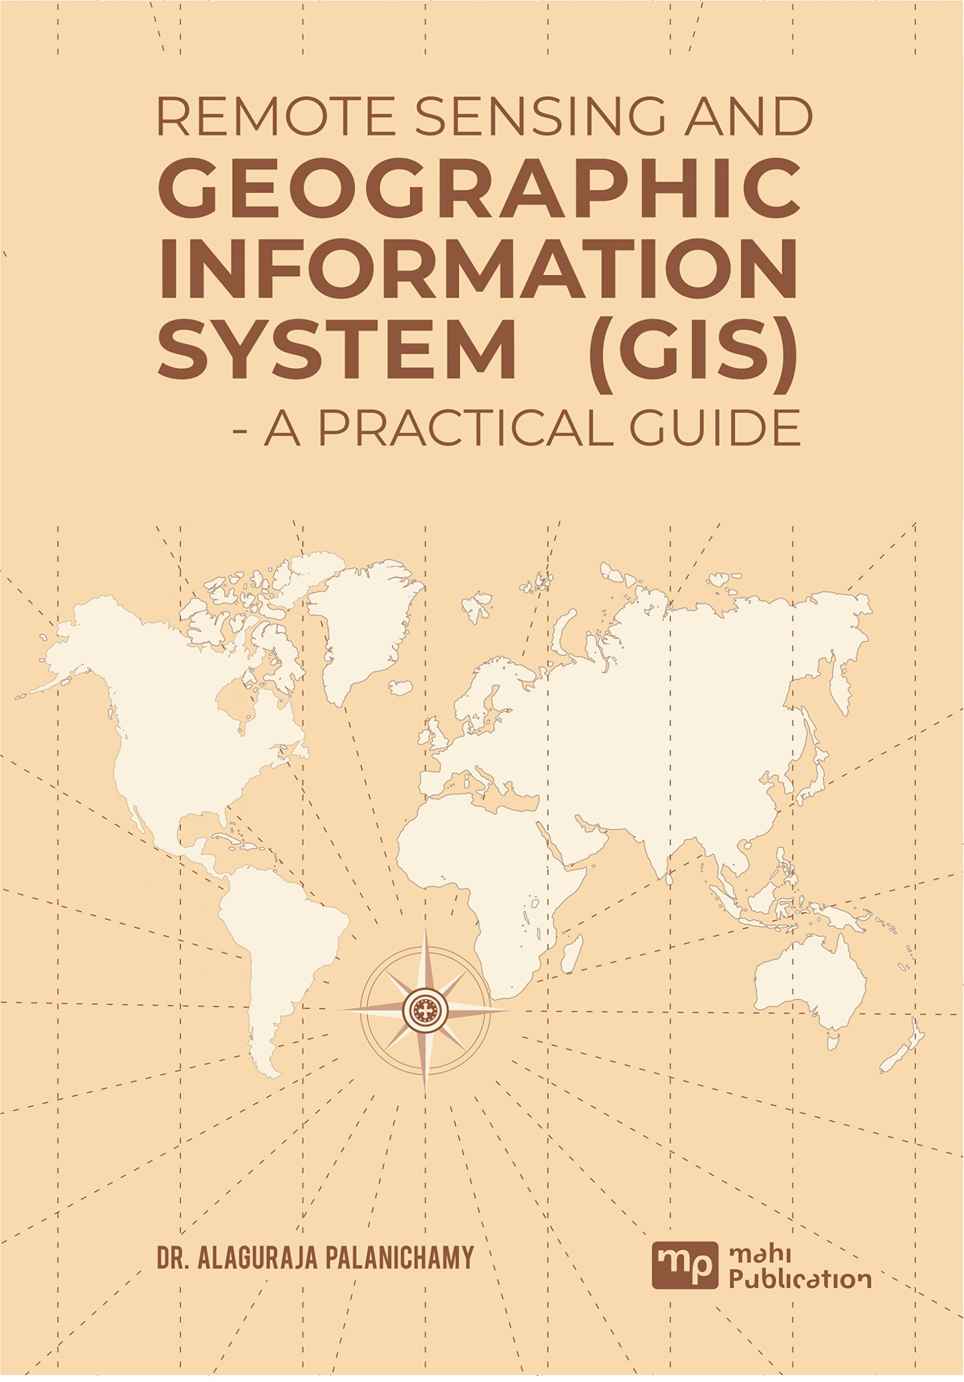 Remote Sensing And Geographic Information System (gis) - A Practical Guide